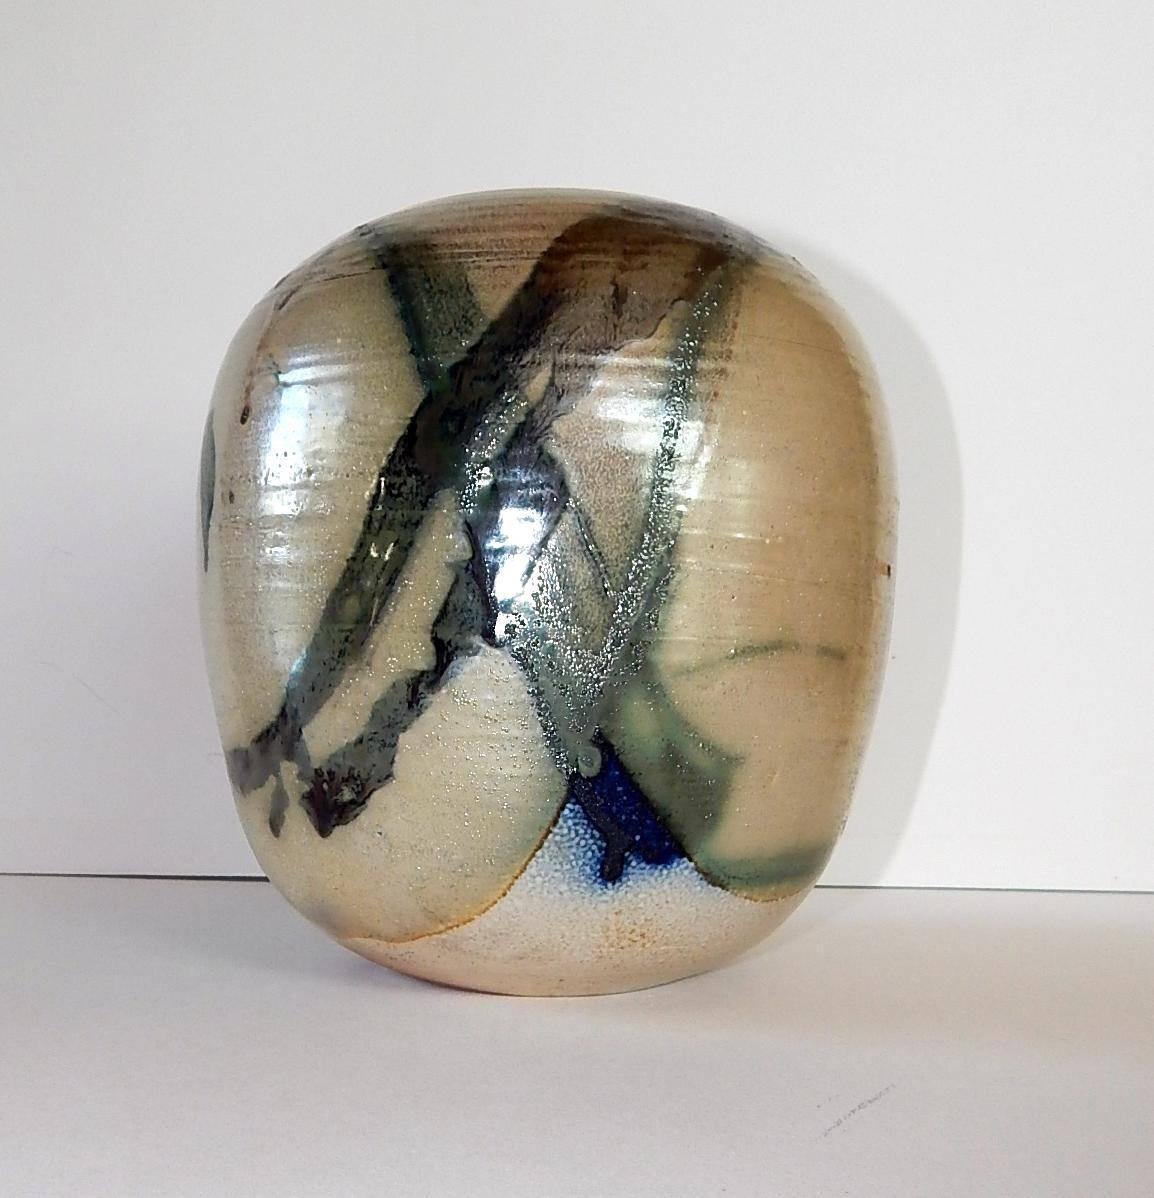 Colorful abstract moon pot design with rattle.
Extraordinary glaze.
Signed on the base with her TT monogram.
Measures: 8 1/2 inches H x 7 inches D.

Toshiko Takaezu (1922-2011), a Japanese-American ceramist who helped elevate ceramics from the